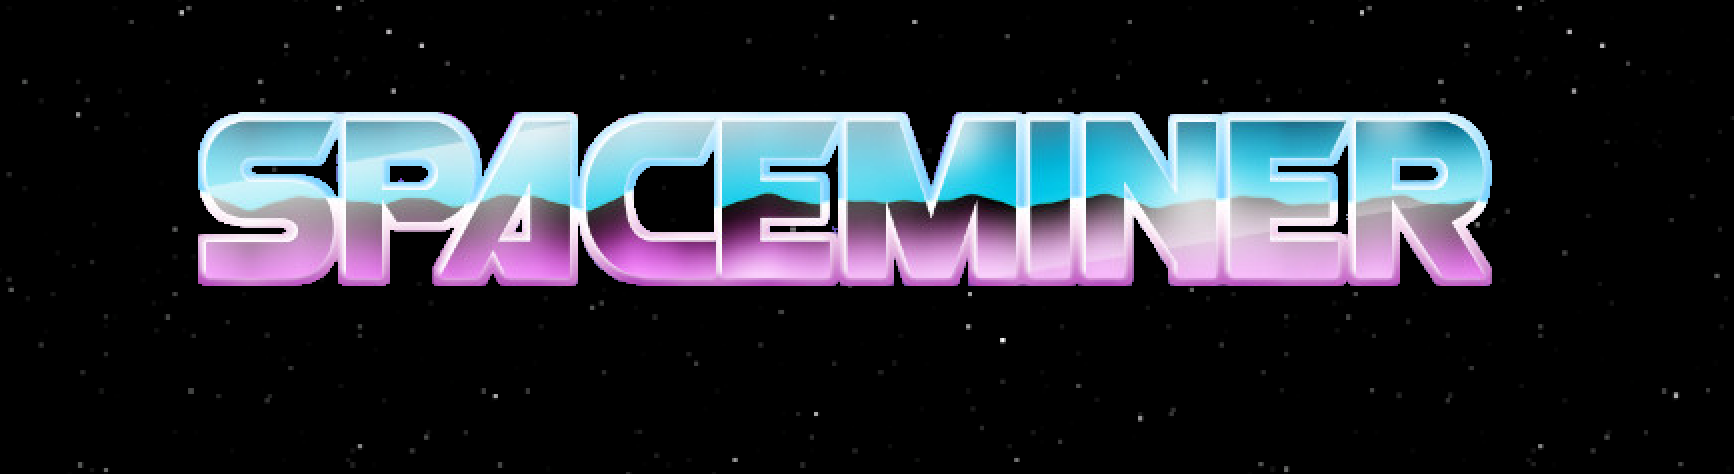 SpaceMiner